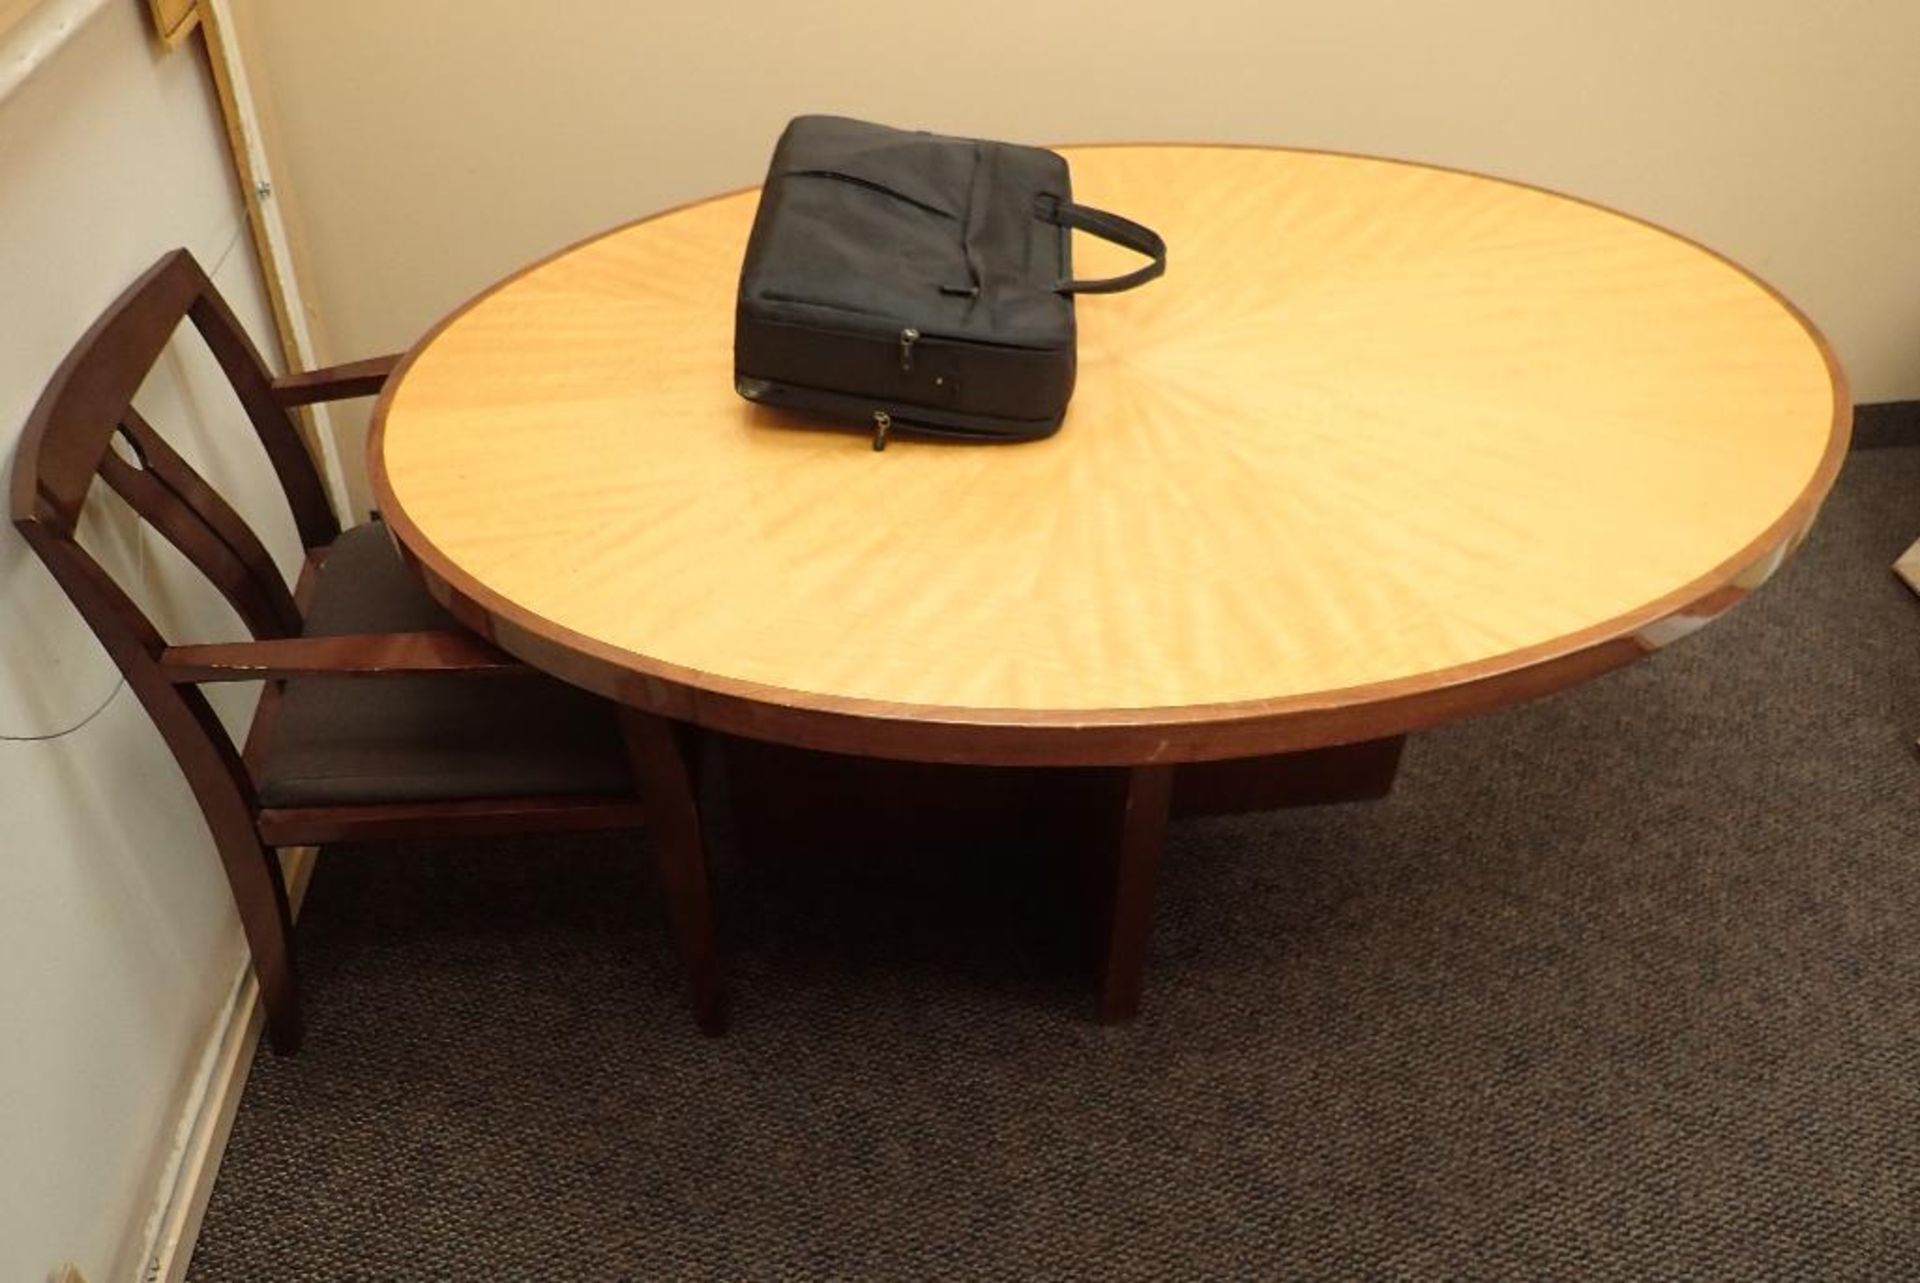 Contents of office, oval table, desk, mini fridge, chair. **Rigging Fee: $150** (Located in Delta, B